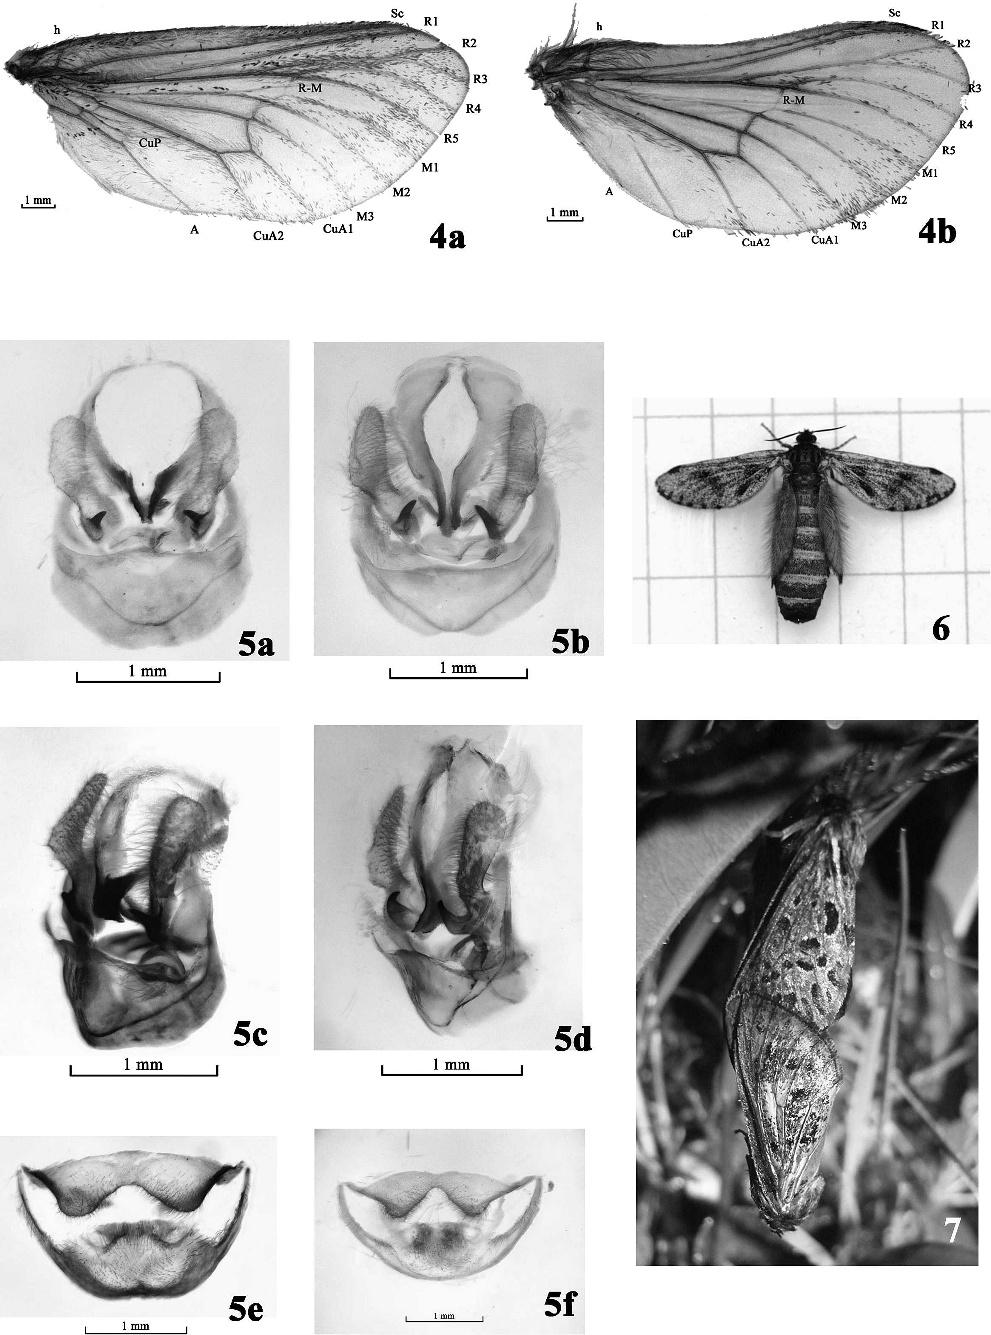 2011 ZOU ET AL.: TWO NEW SPECIES OF THITARODES FROM TIBET IN CHINA 109 Figures 4 7. Figure 4. Wings of T. sejilaensis; forewing (a) and hindwing (b). Figure 5. External male genitalia of T.